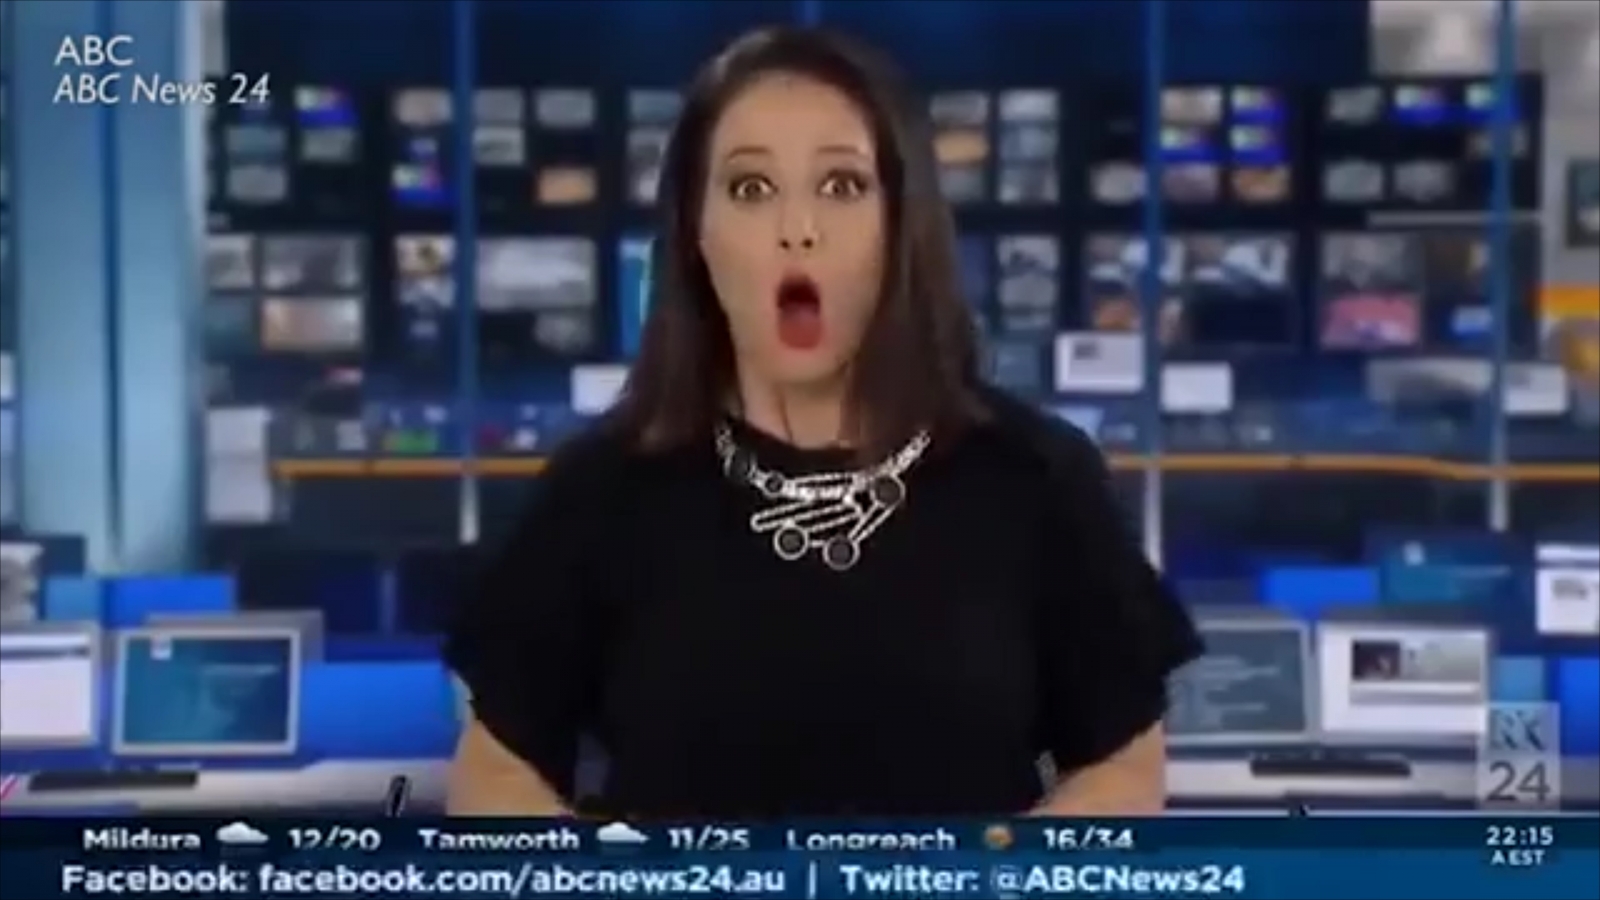 A daydreaming newsreader gasps in shock as she realises she's live on air